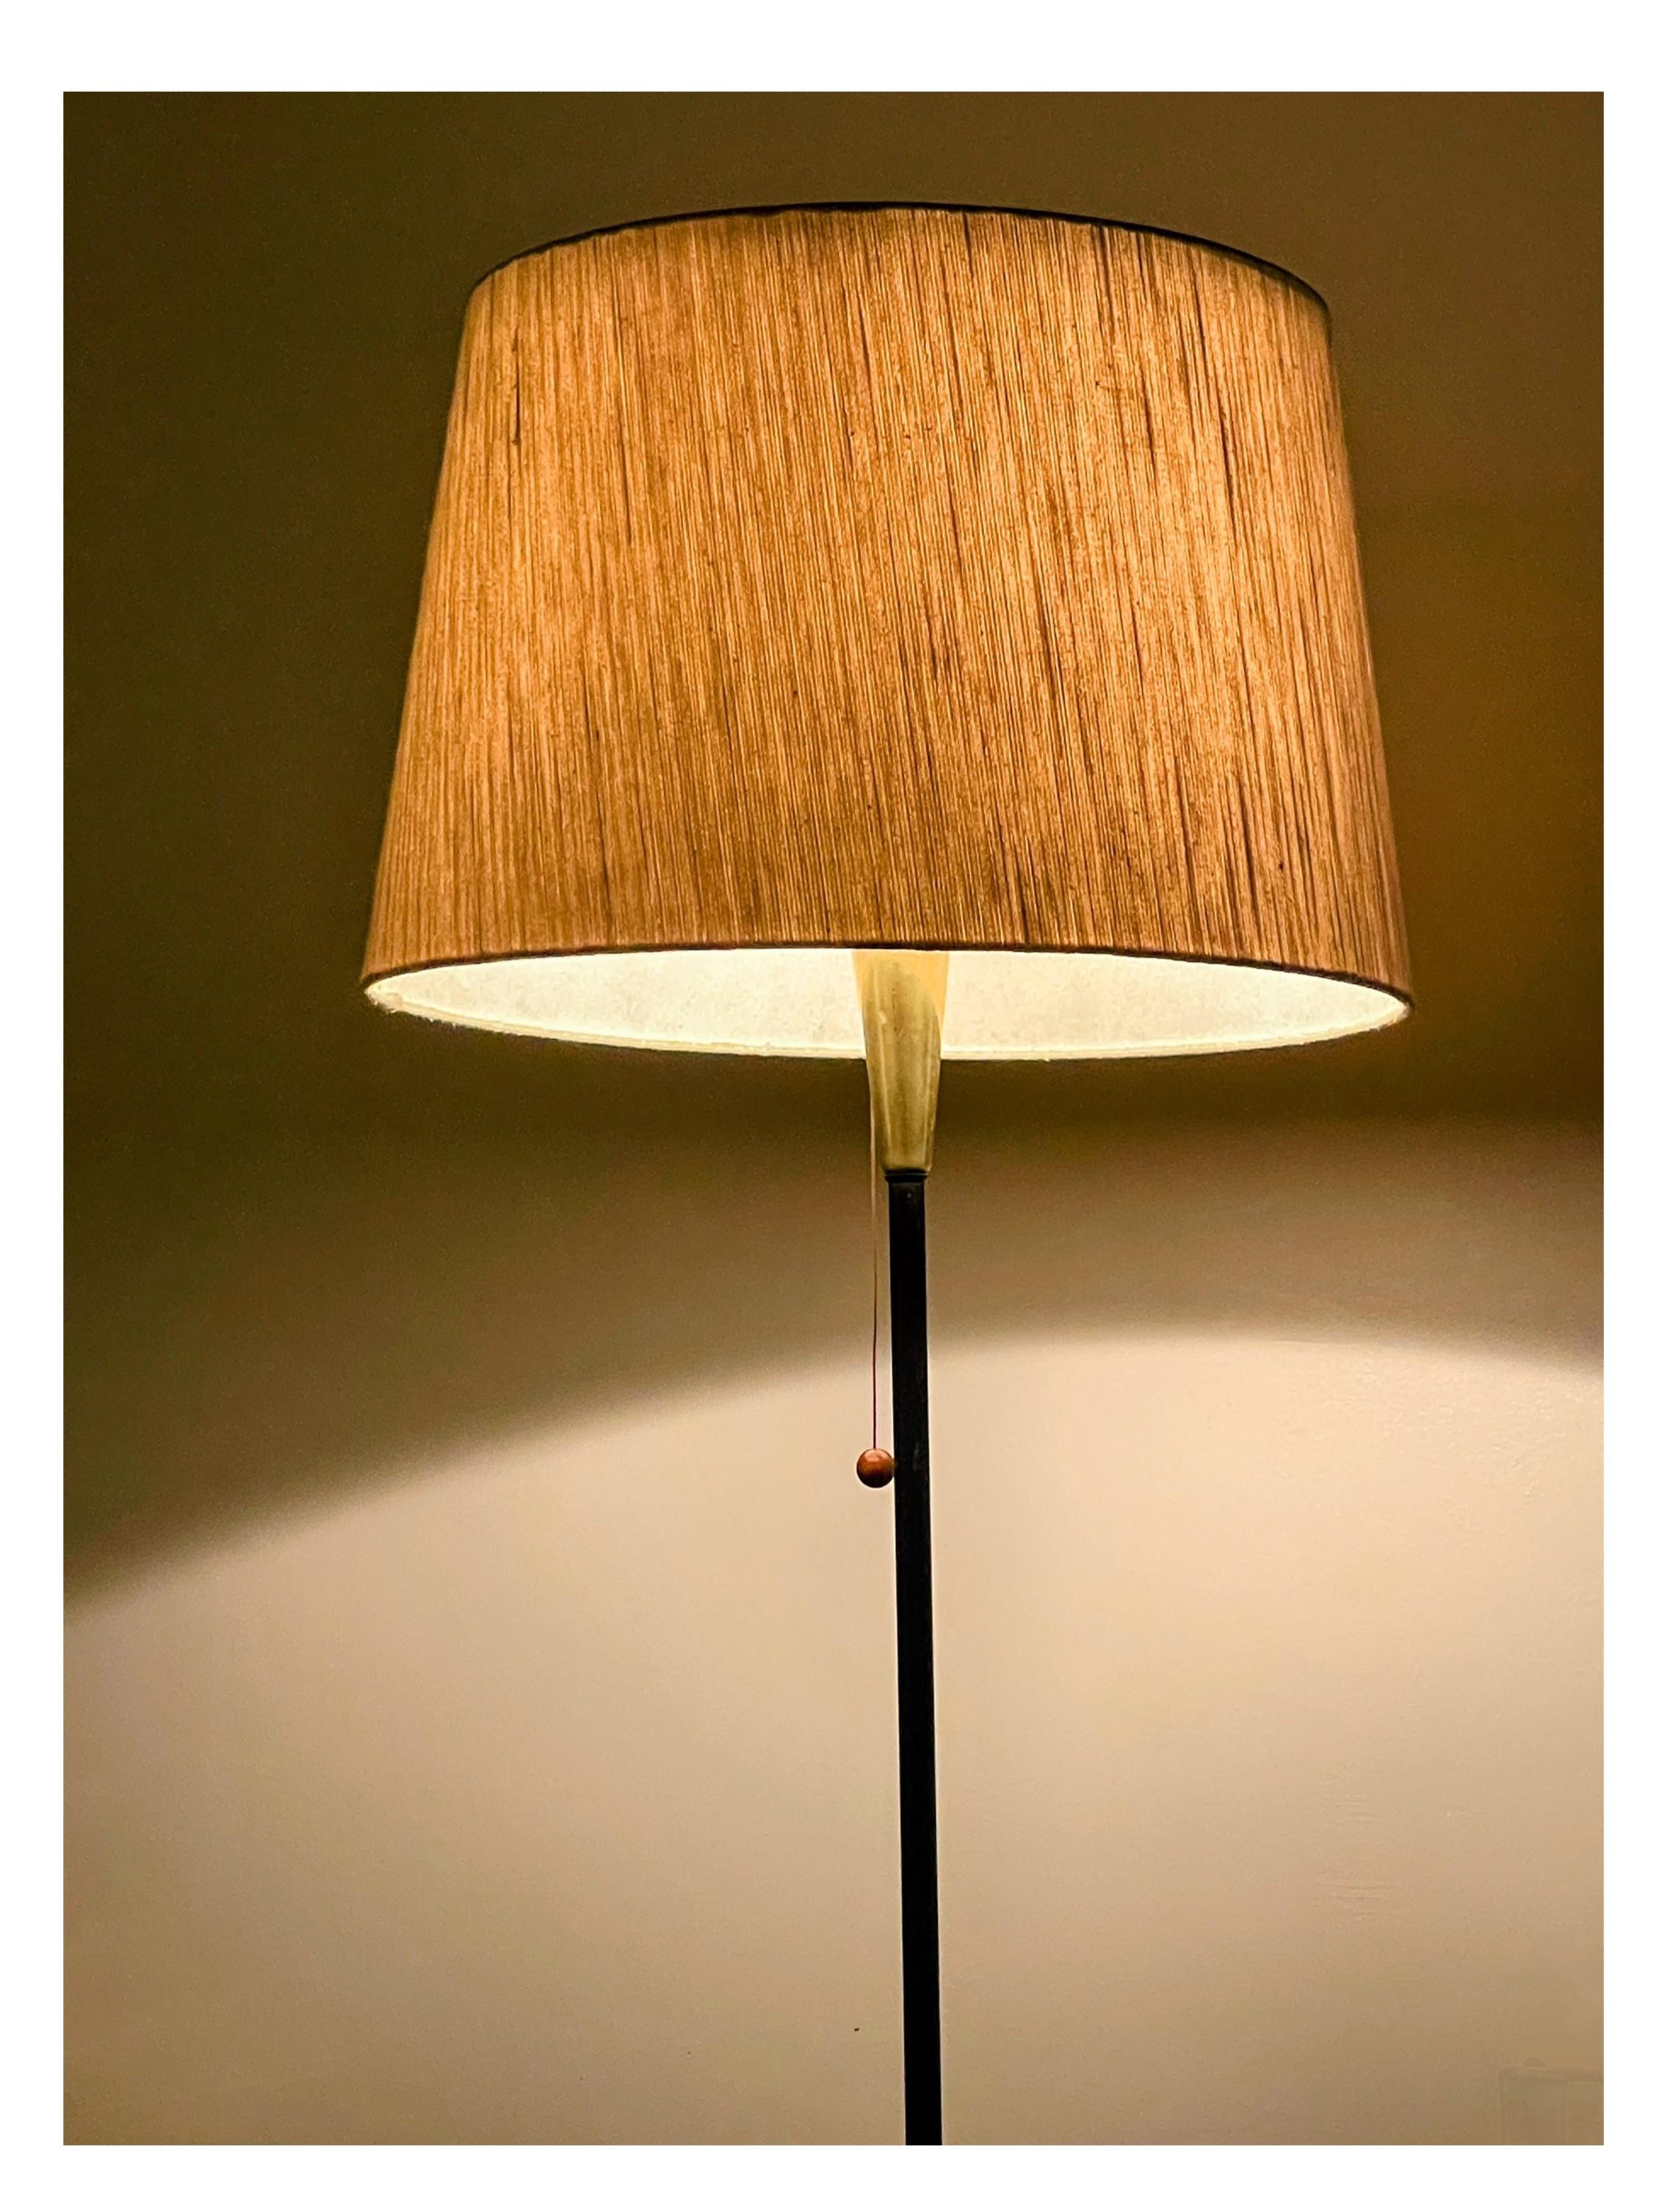 Other Mid-century Modern Floor Lamp by Maria Lindeman for Idman, Finland, 1950s For Sale